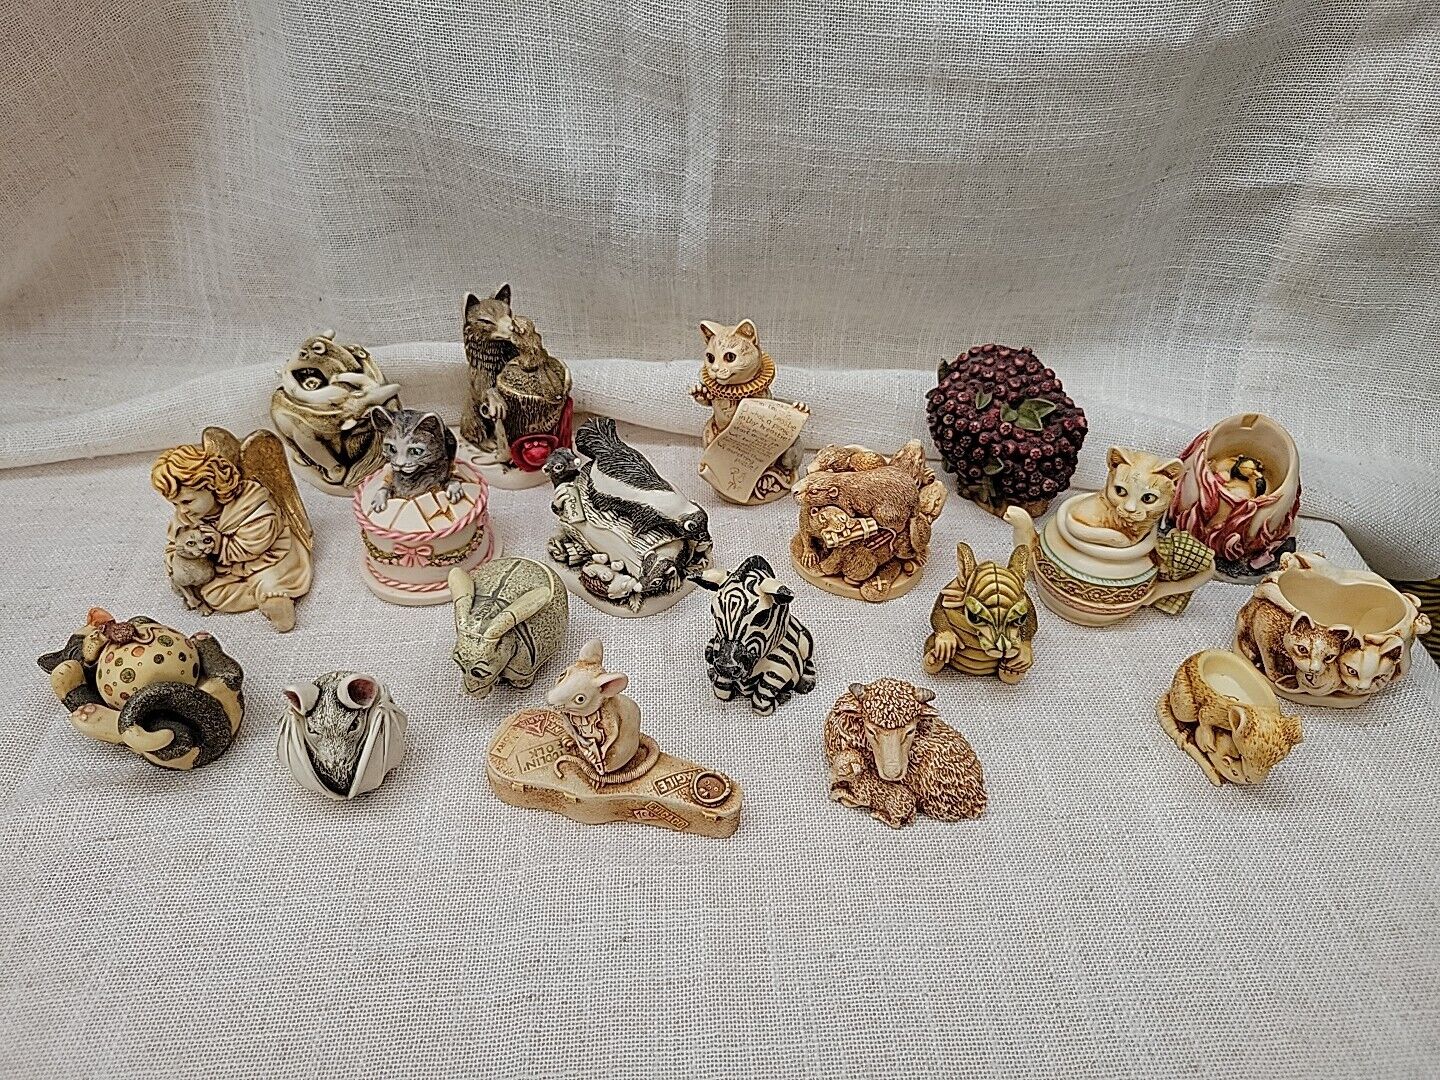 Harmony Kingdom Pot Belly's Roly Poly Figurines Lot of 19